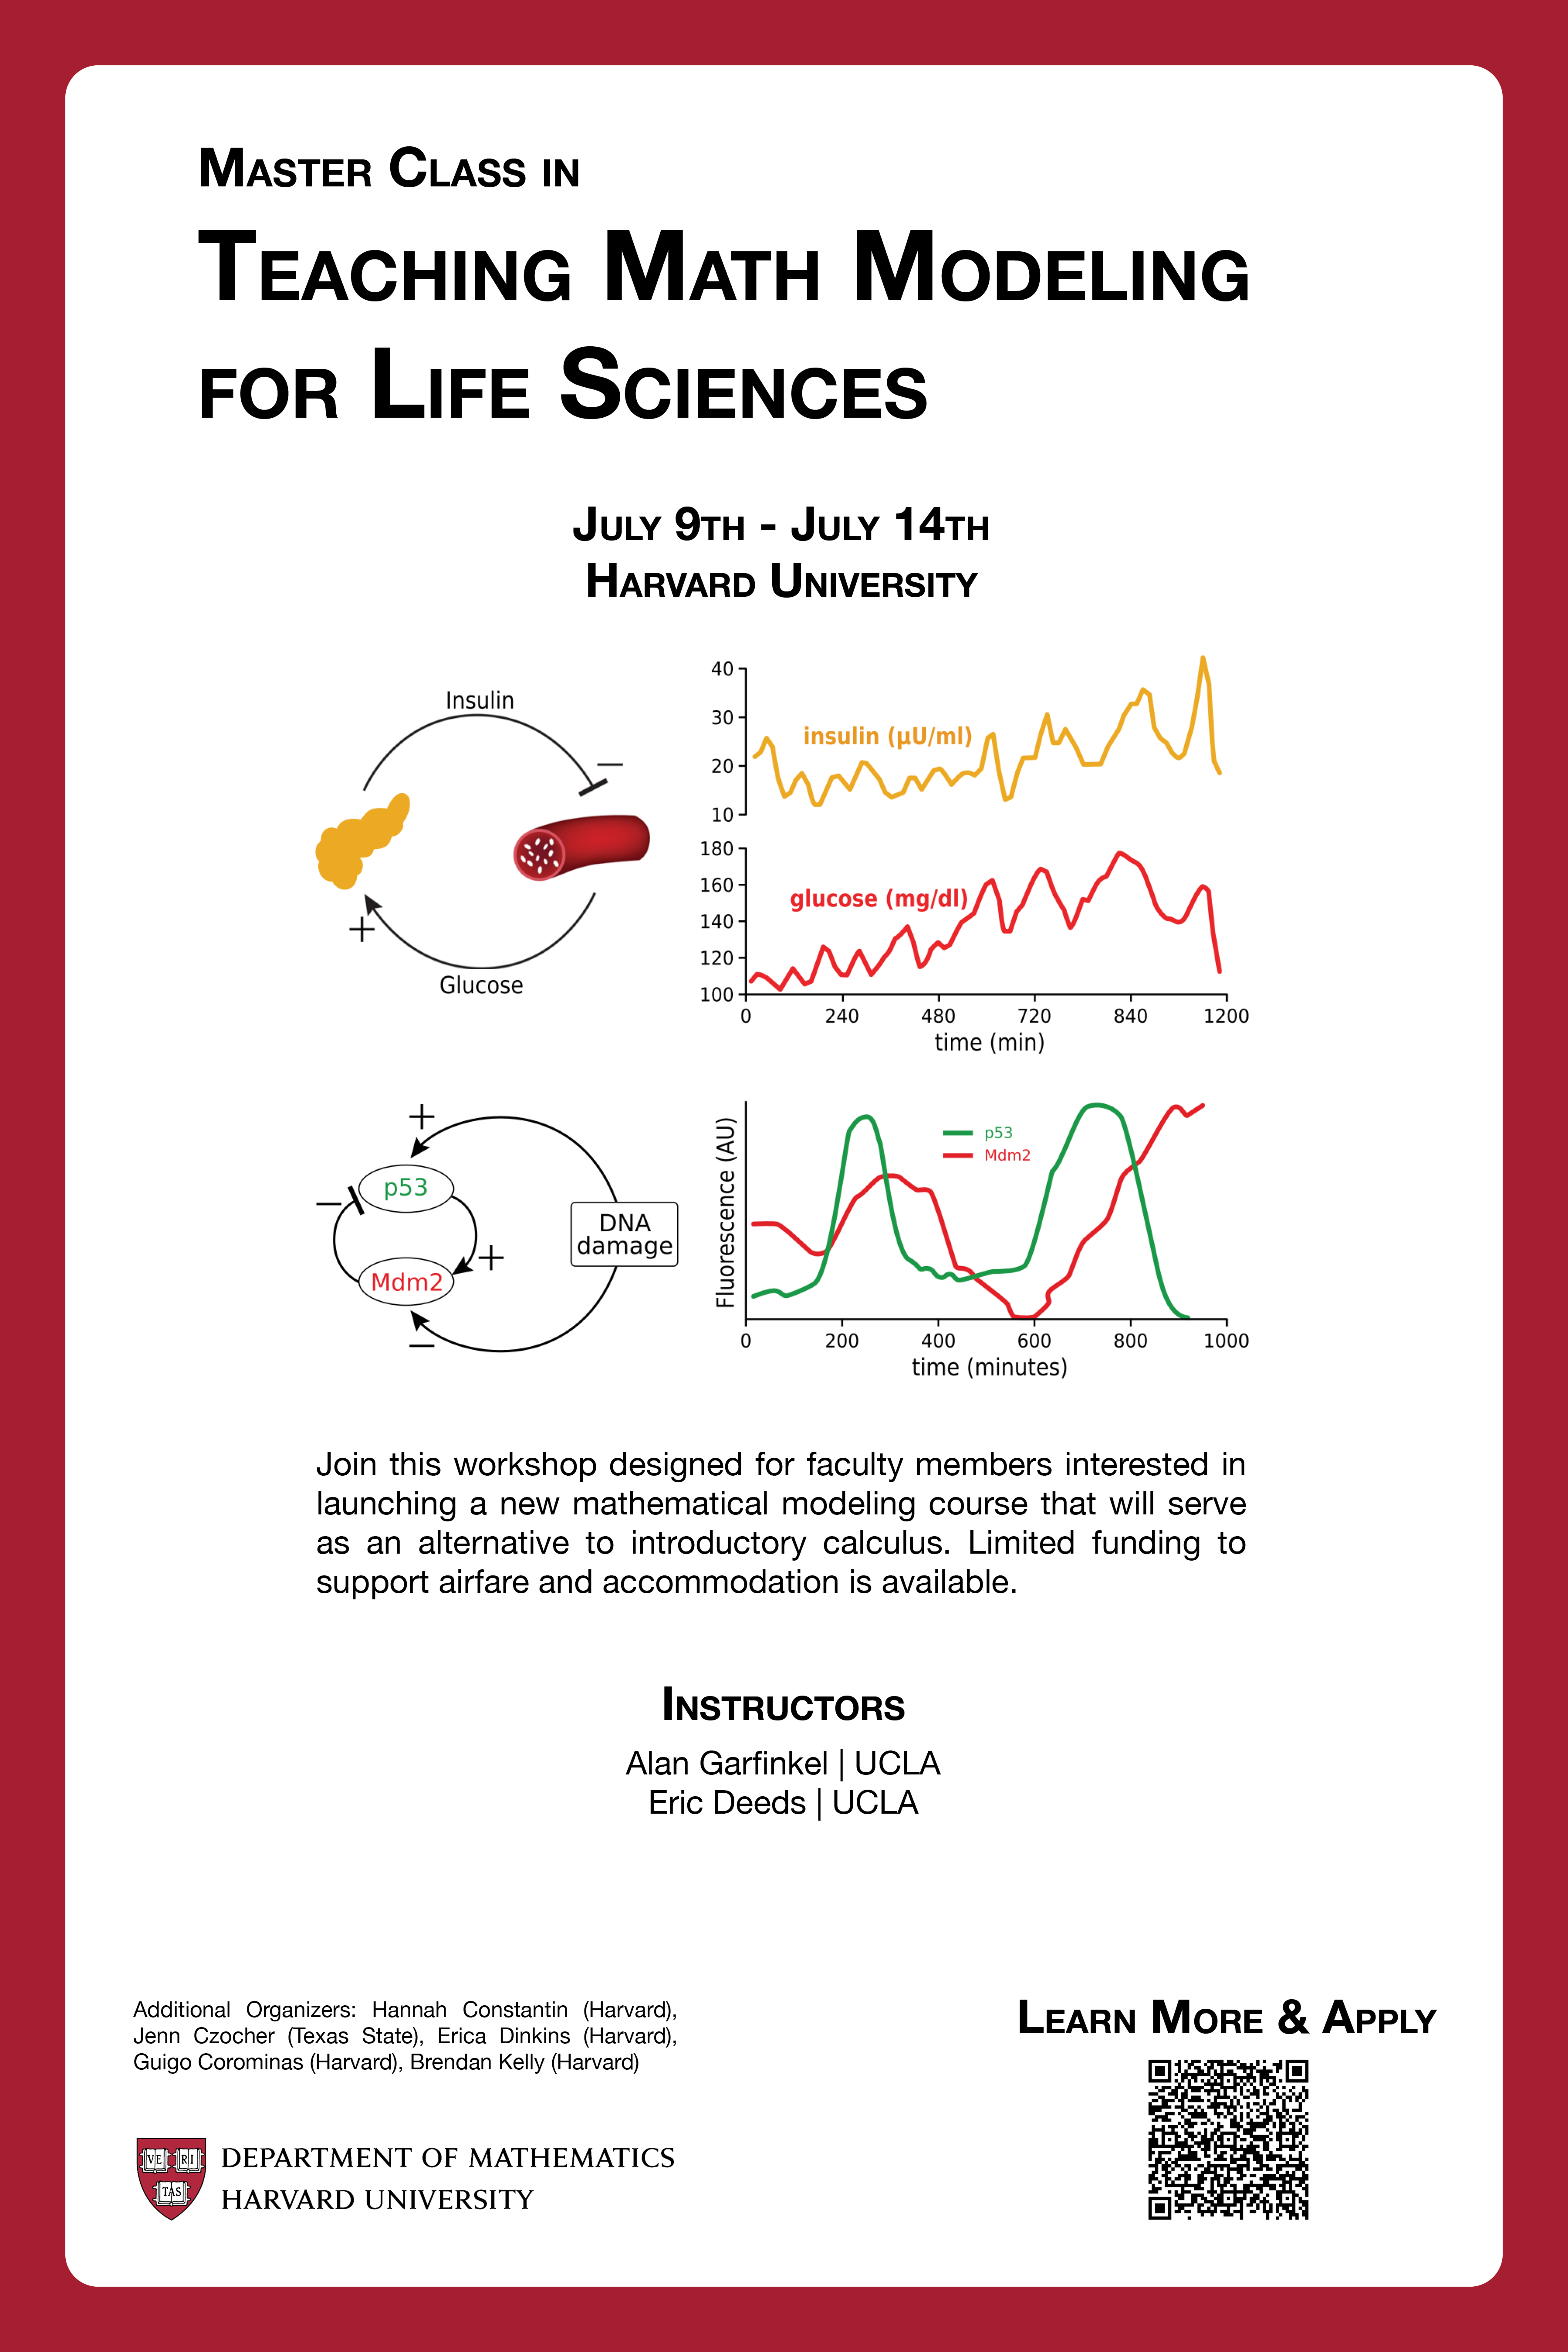 Master Class in Teaching Math Modeling for Life Sciences workshop poster.